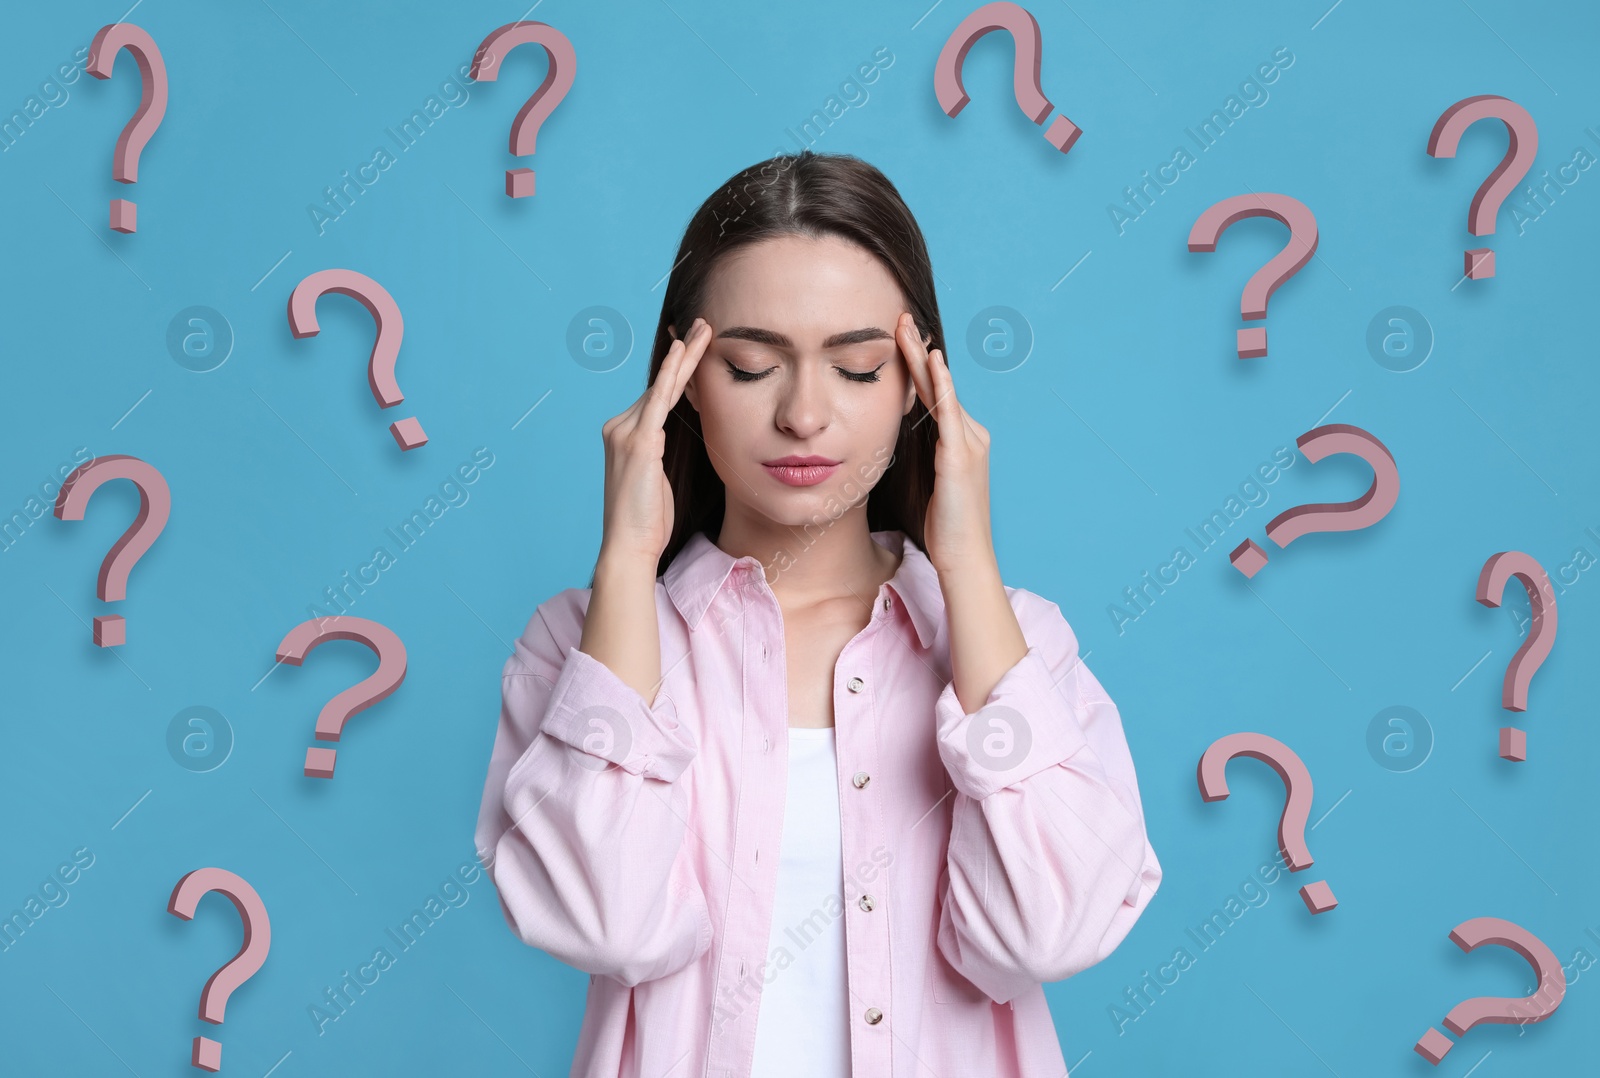 Image of Amnesia. Confused young woman and question marks on light blue background